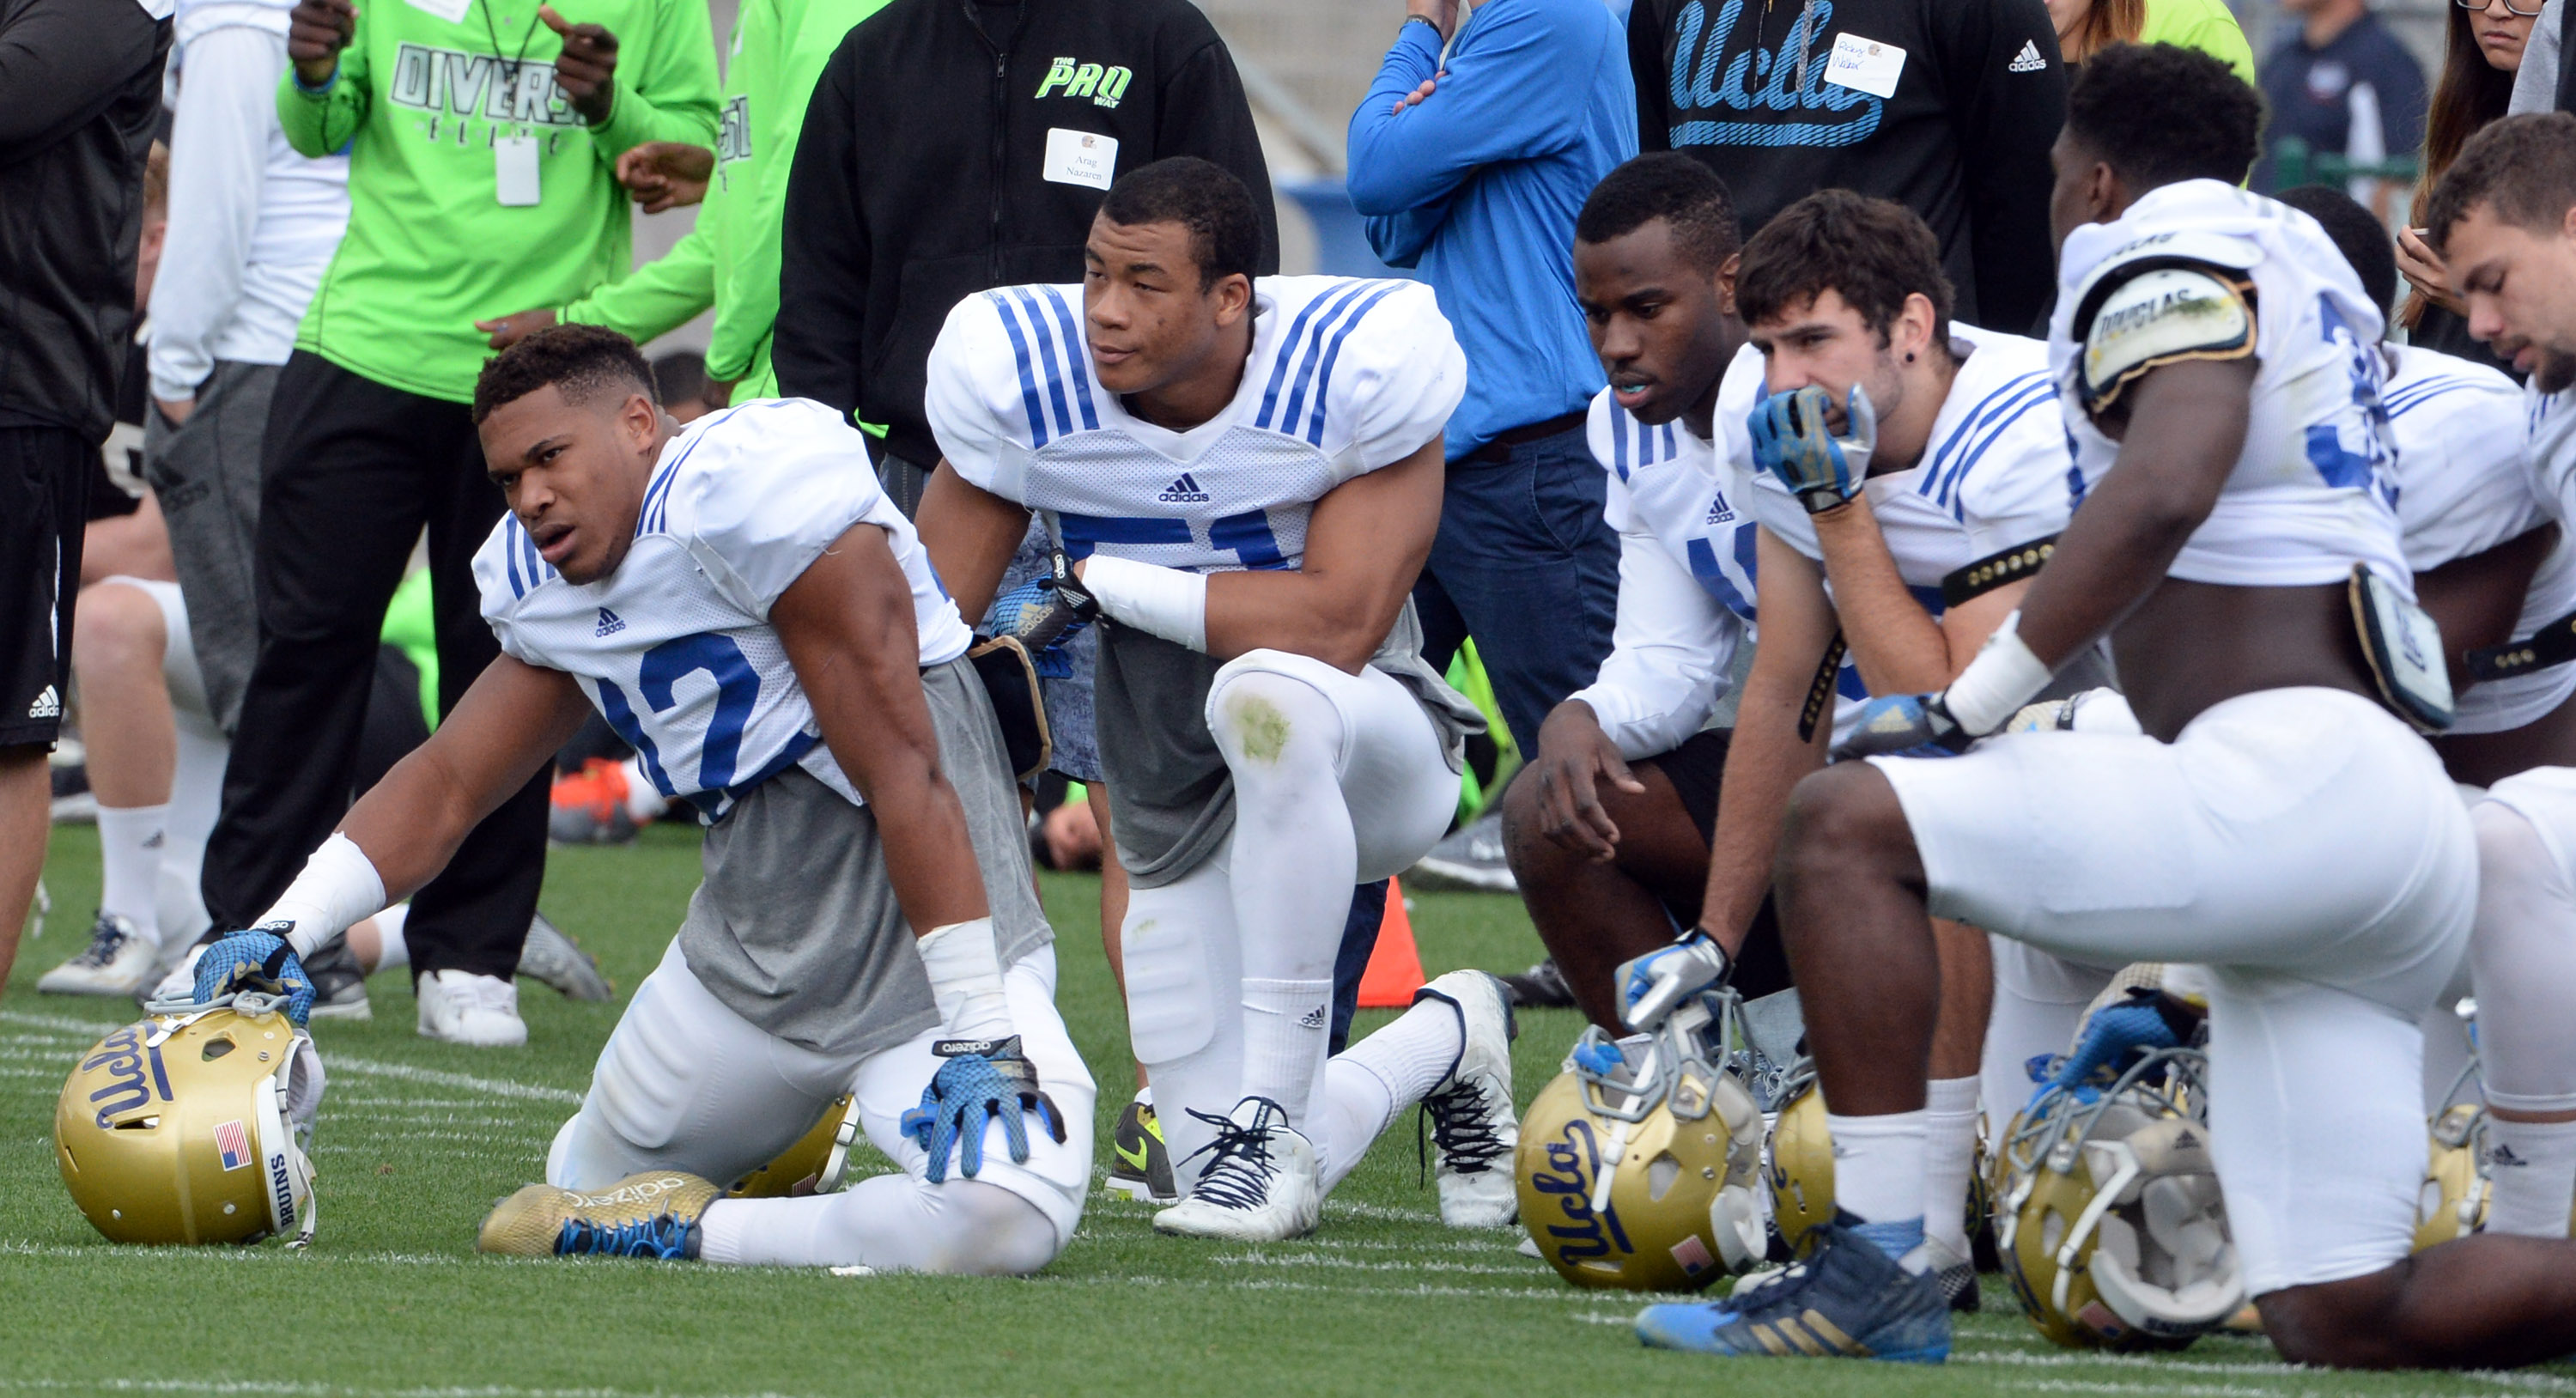 UCLA linebackers watch during the Bruins' "Spring Showcase" at the Rose Bowl on April 24, 2015. (Keith Birmingham/Staff)